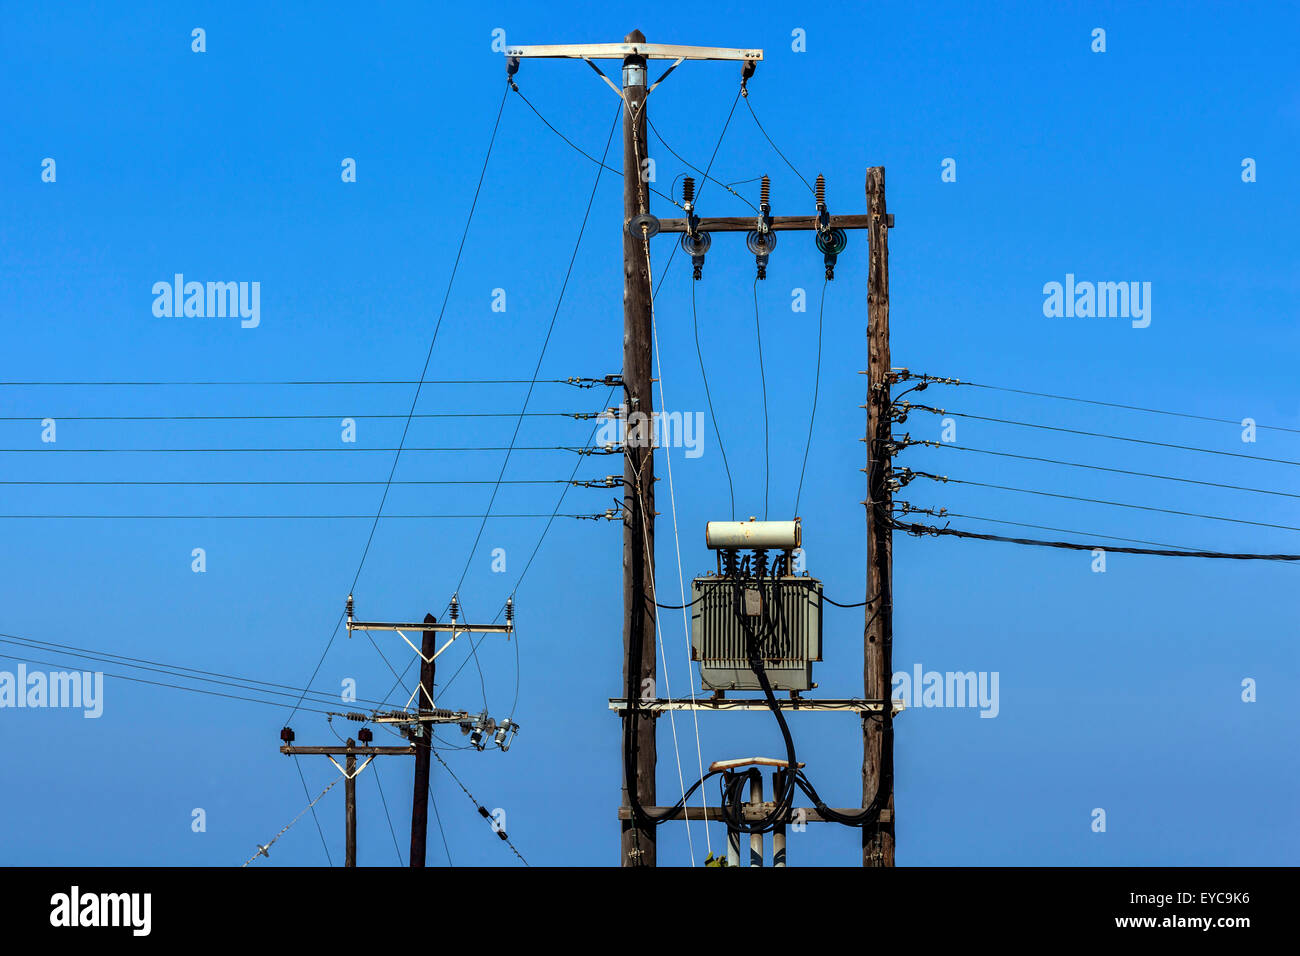 Electricity Electrical transformer and Power wires in sky Greece Stock Photo